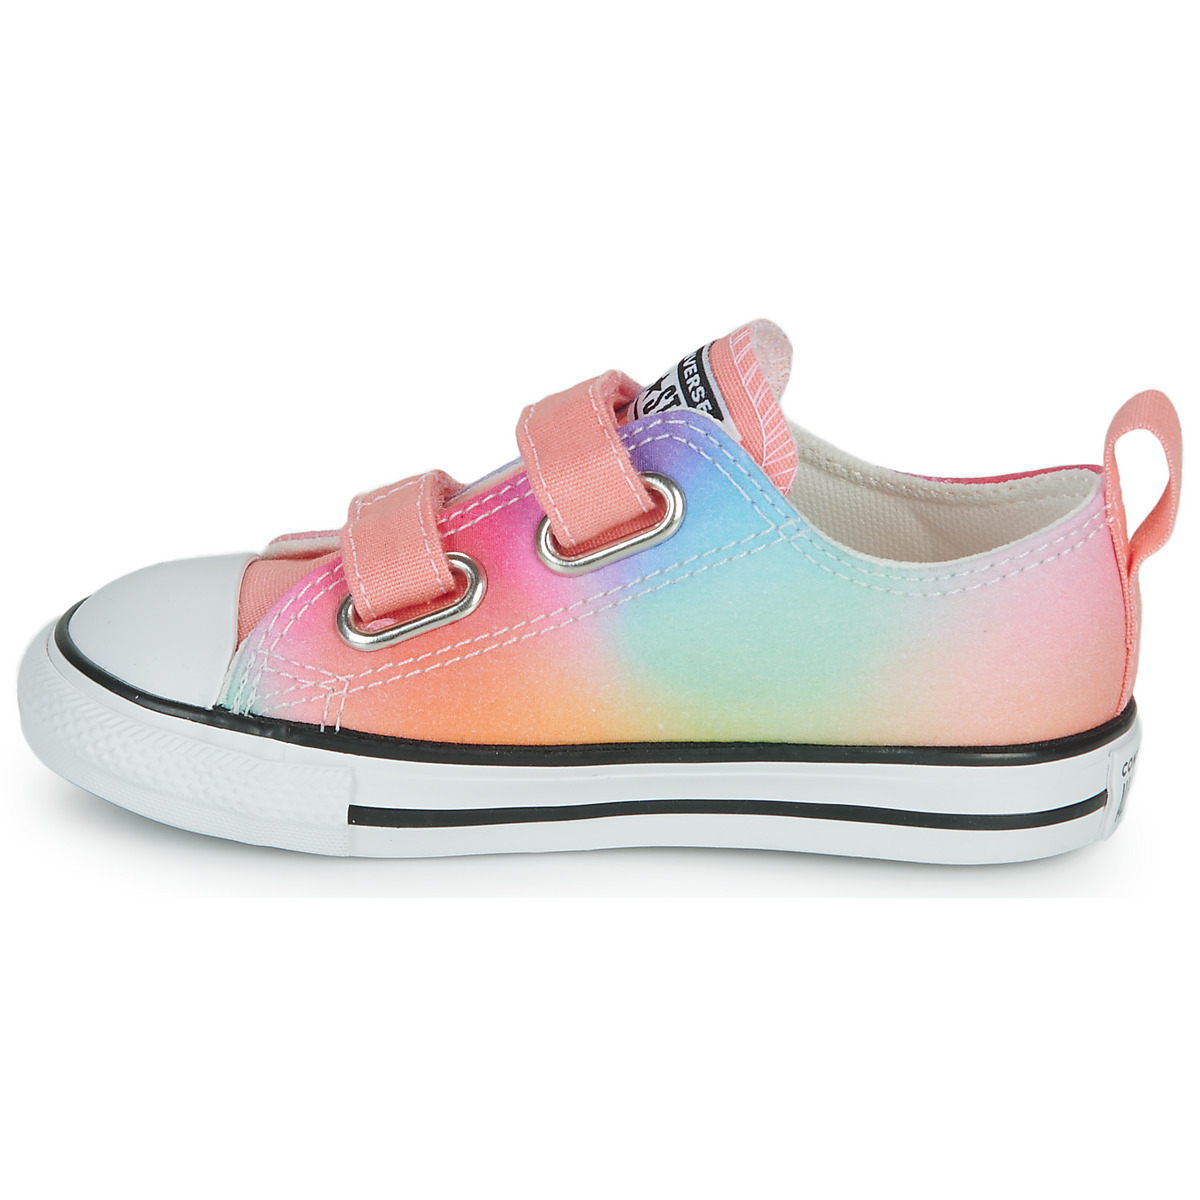 Converse Multicolore INFANT CONVERSE CHUCK TAYLOR ALL STAR 2V EASY-ON MAJESTIC MERMAI ws69aWH7